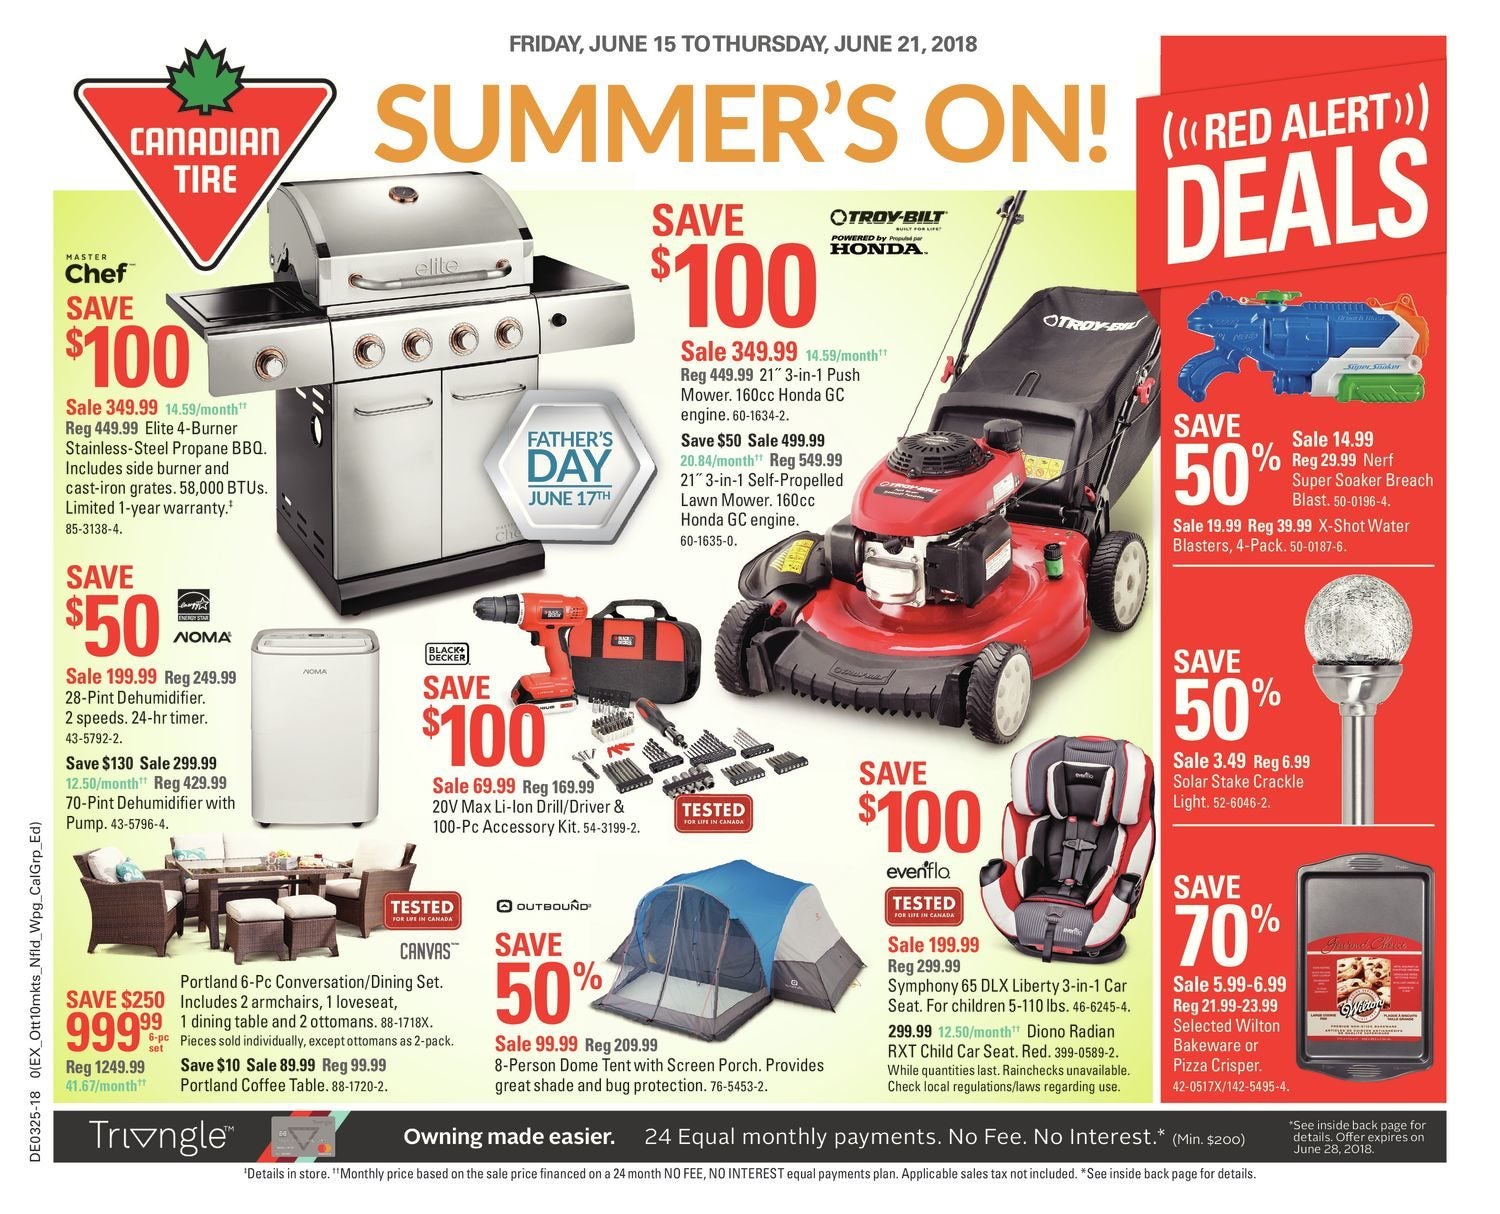 Canadian Tire Weekly Flyer Weekly Summer S On Jun 15 21